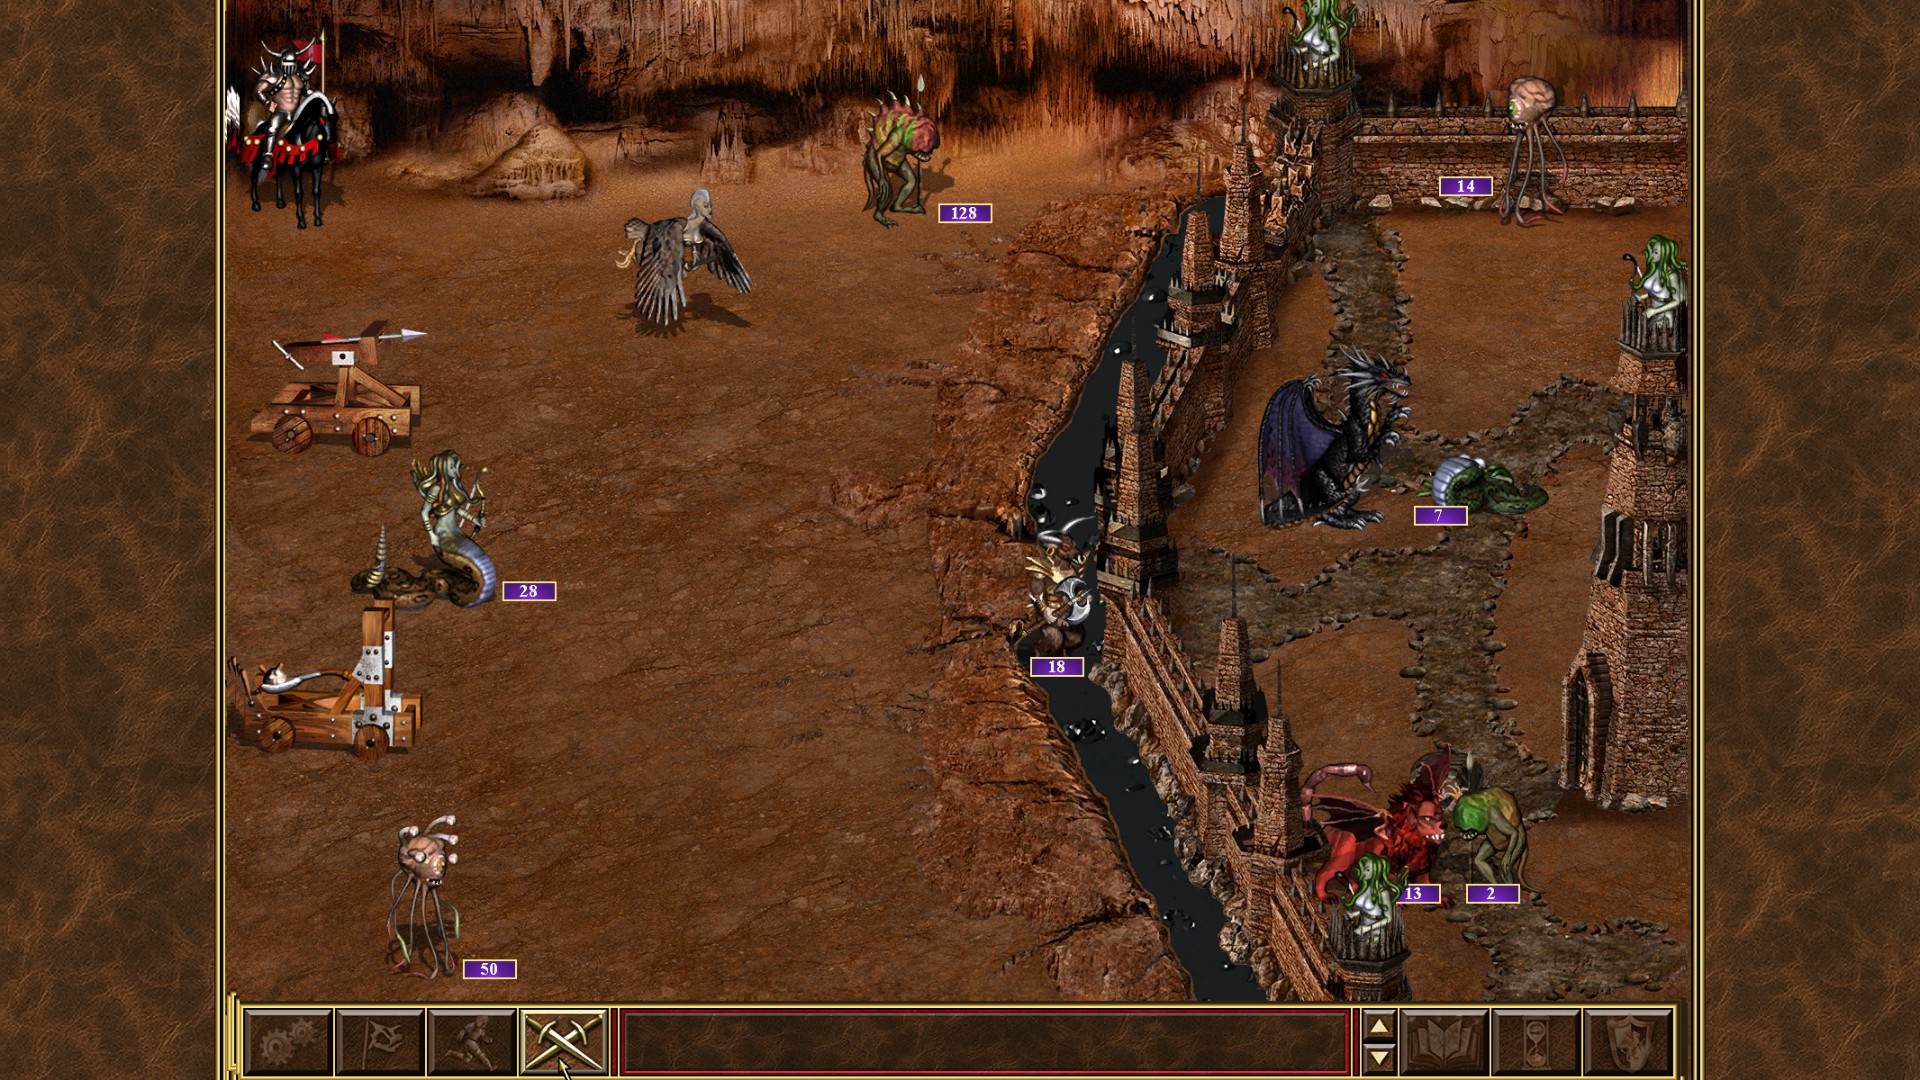 heroes of might and magic 2 online play download